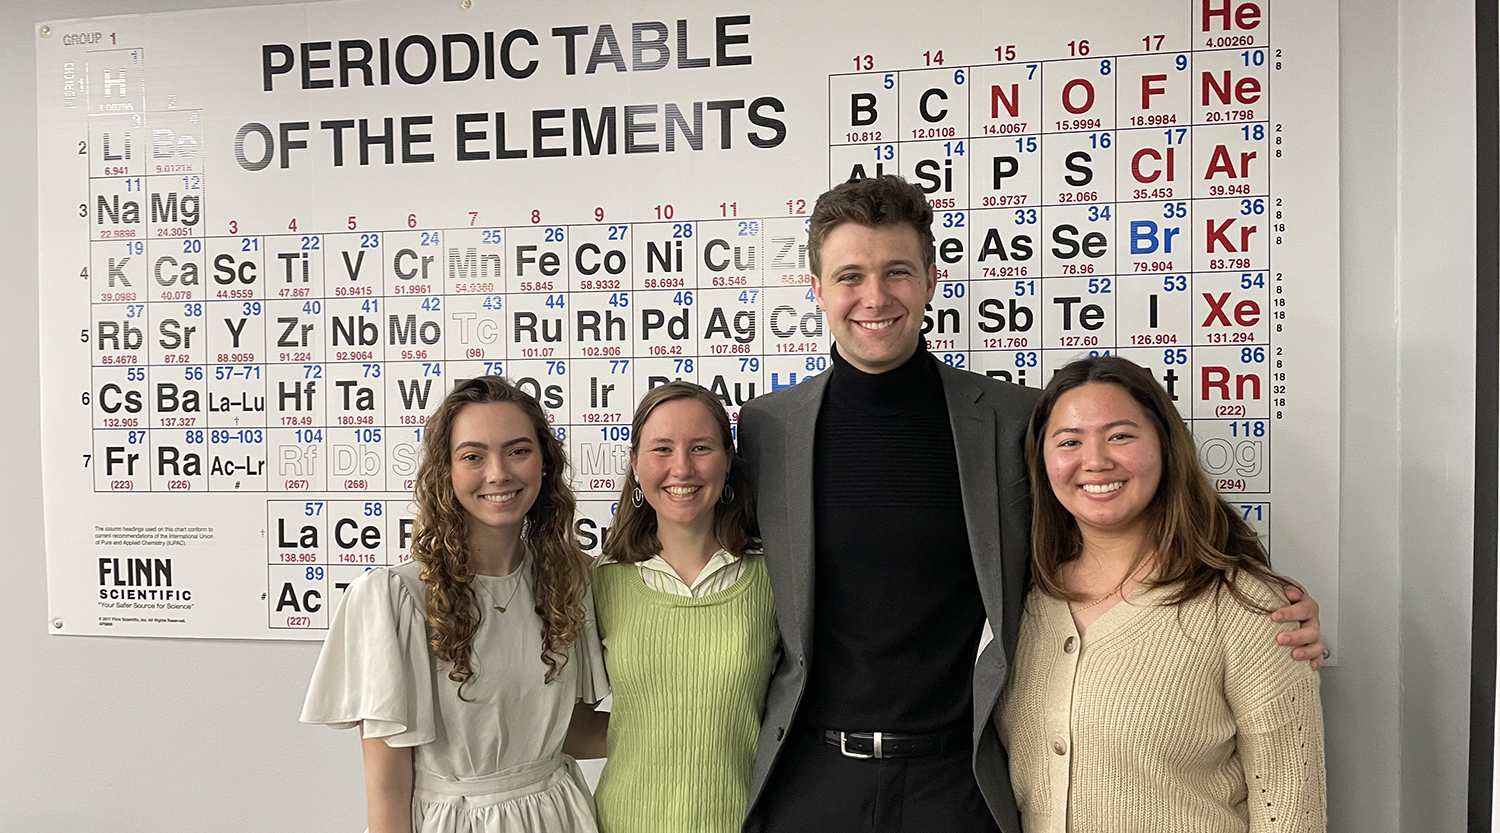 Chemistry Honors Students during their thesis presentation with the periodic table in the background